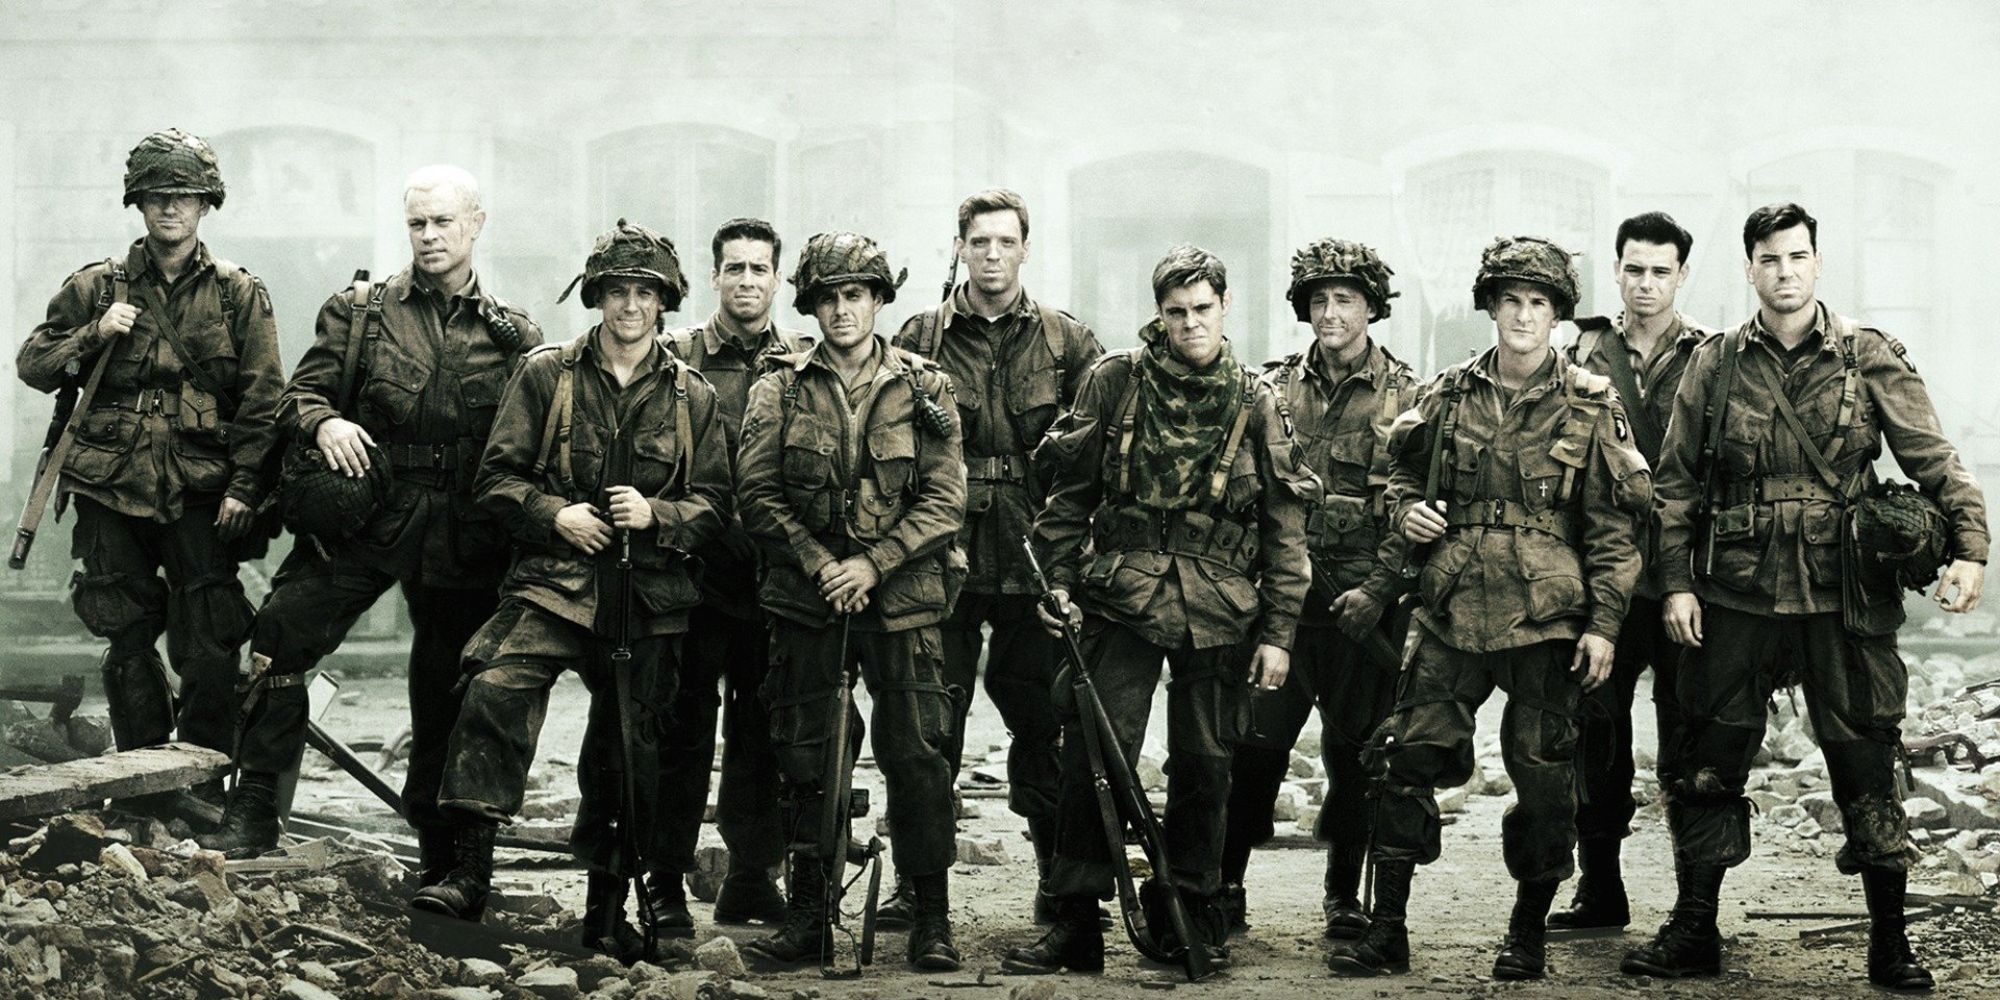 A band of soldiers filmed in the HBO miniseries Band Of Brothers.